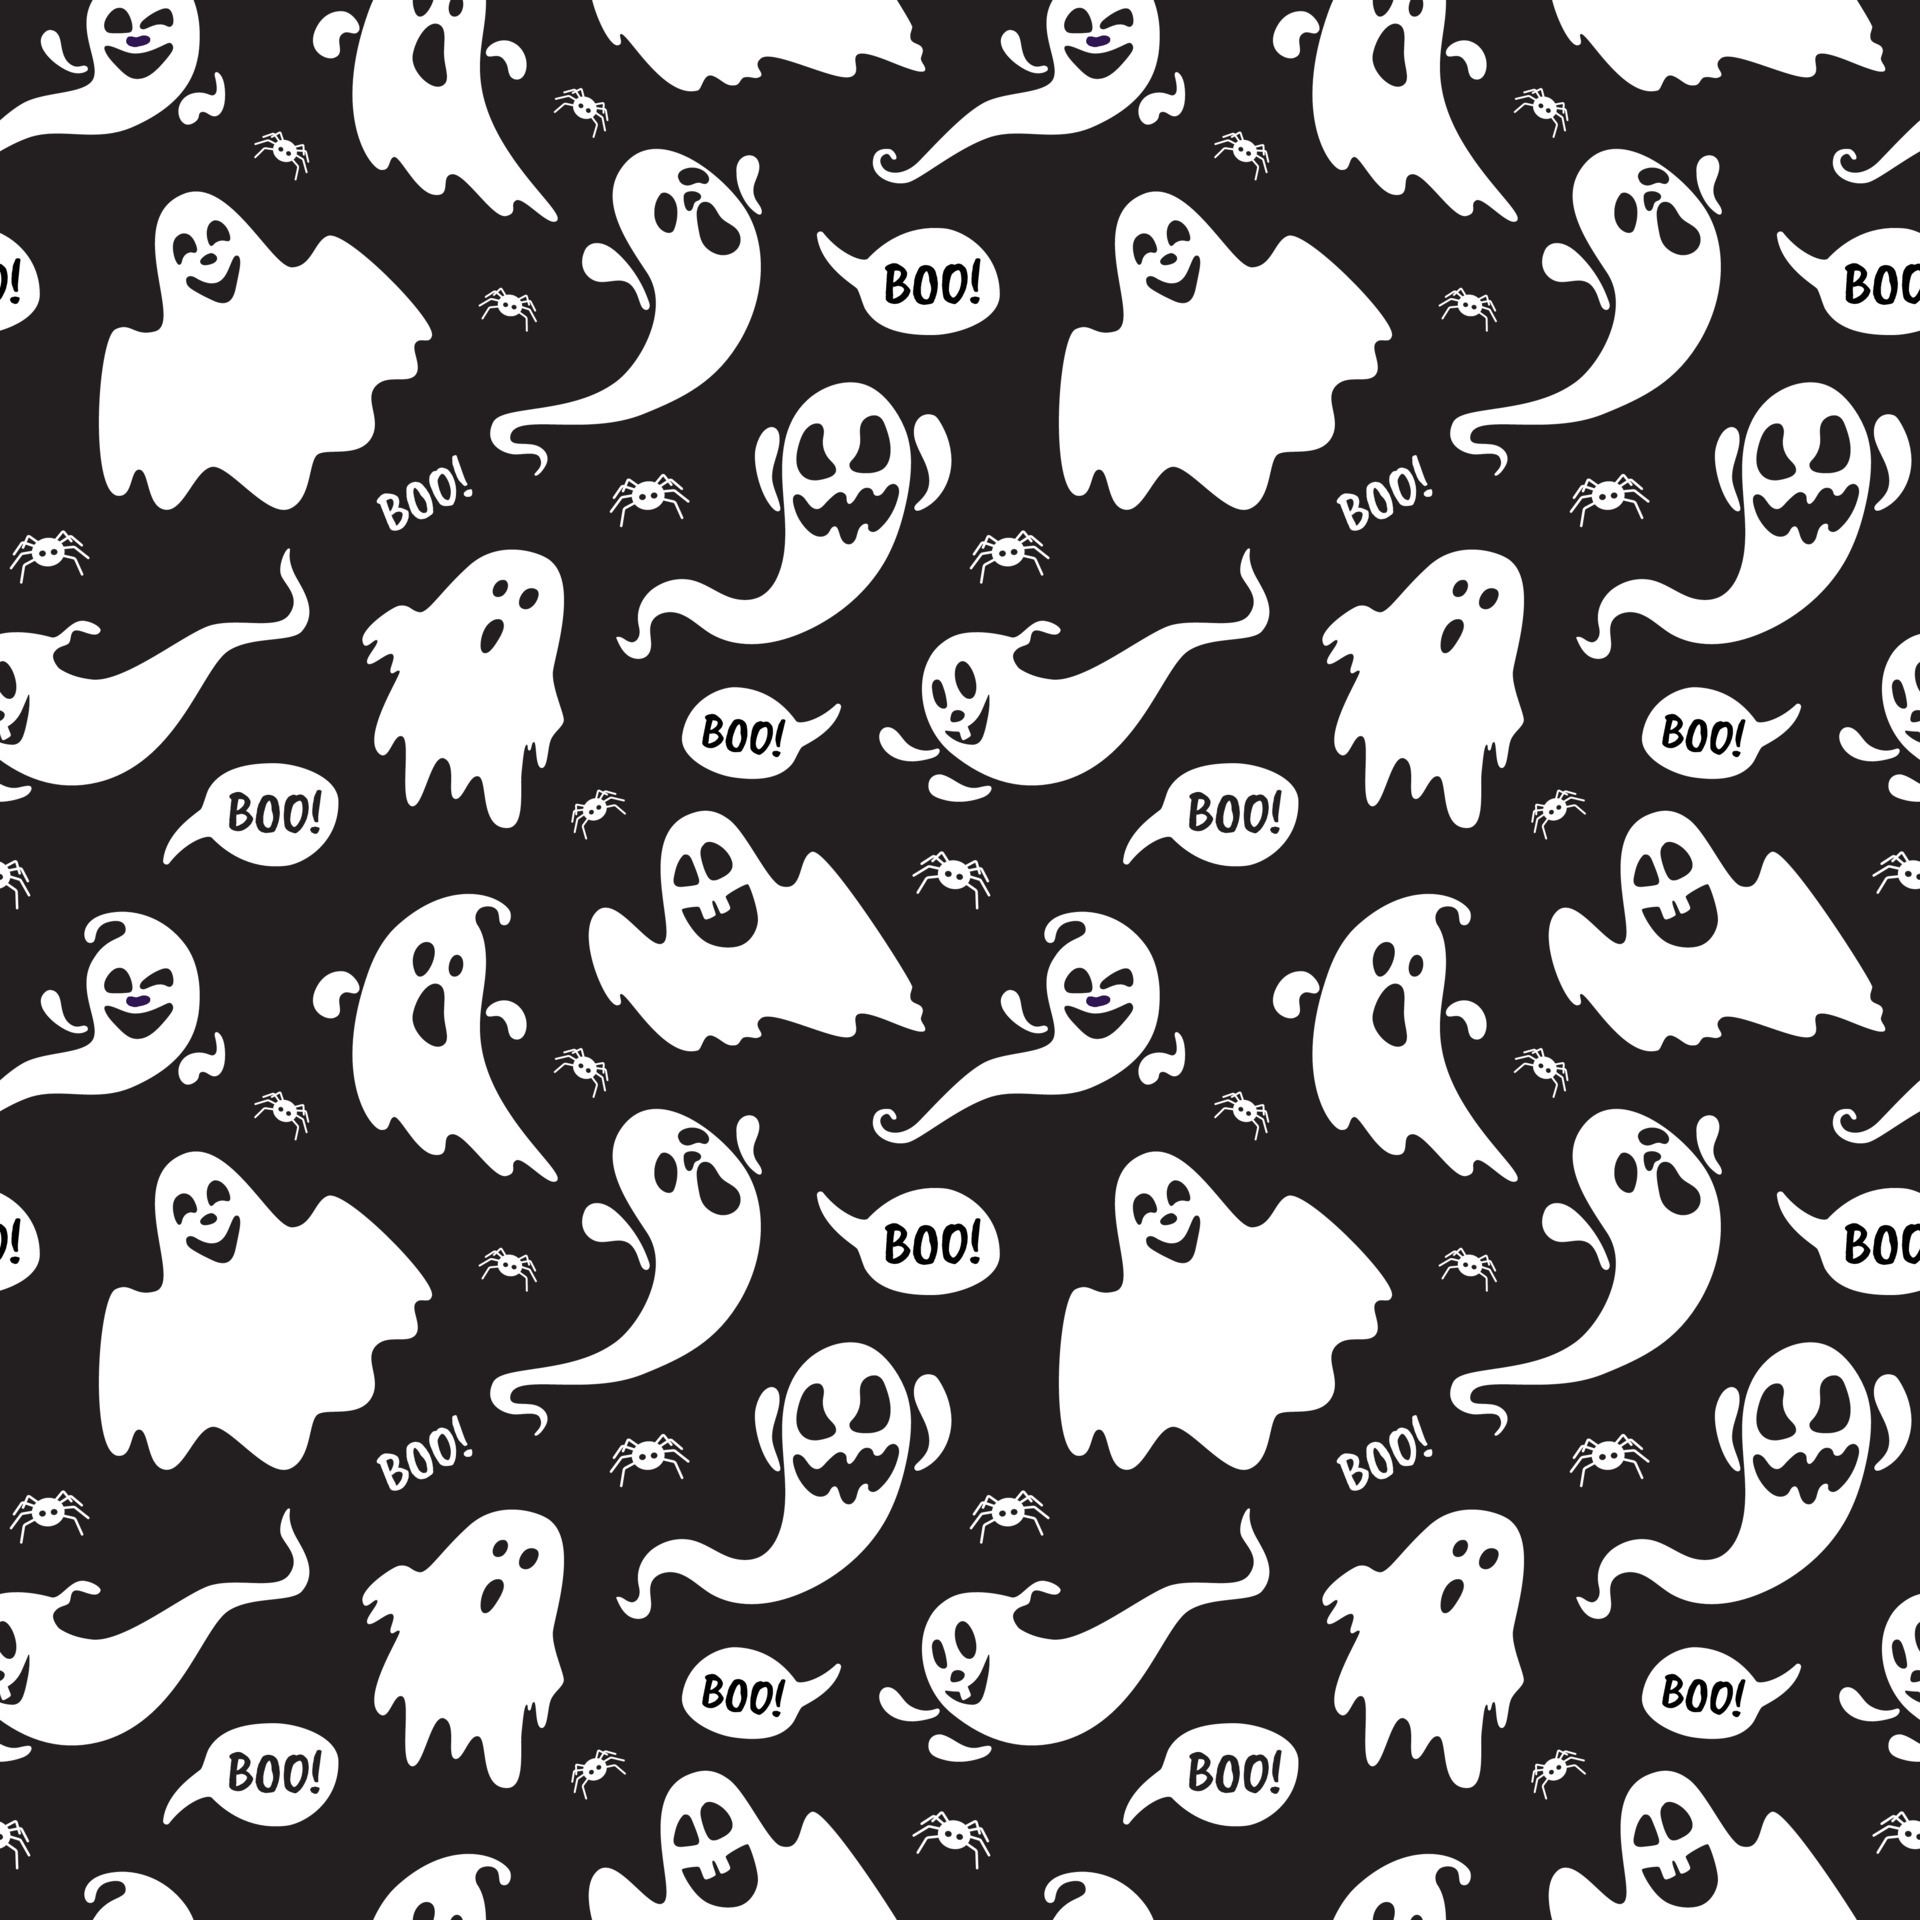 Cute ghost boo holiday character seamless pattern flat style design ...